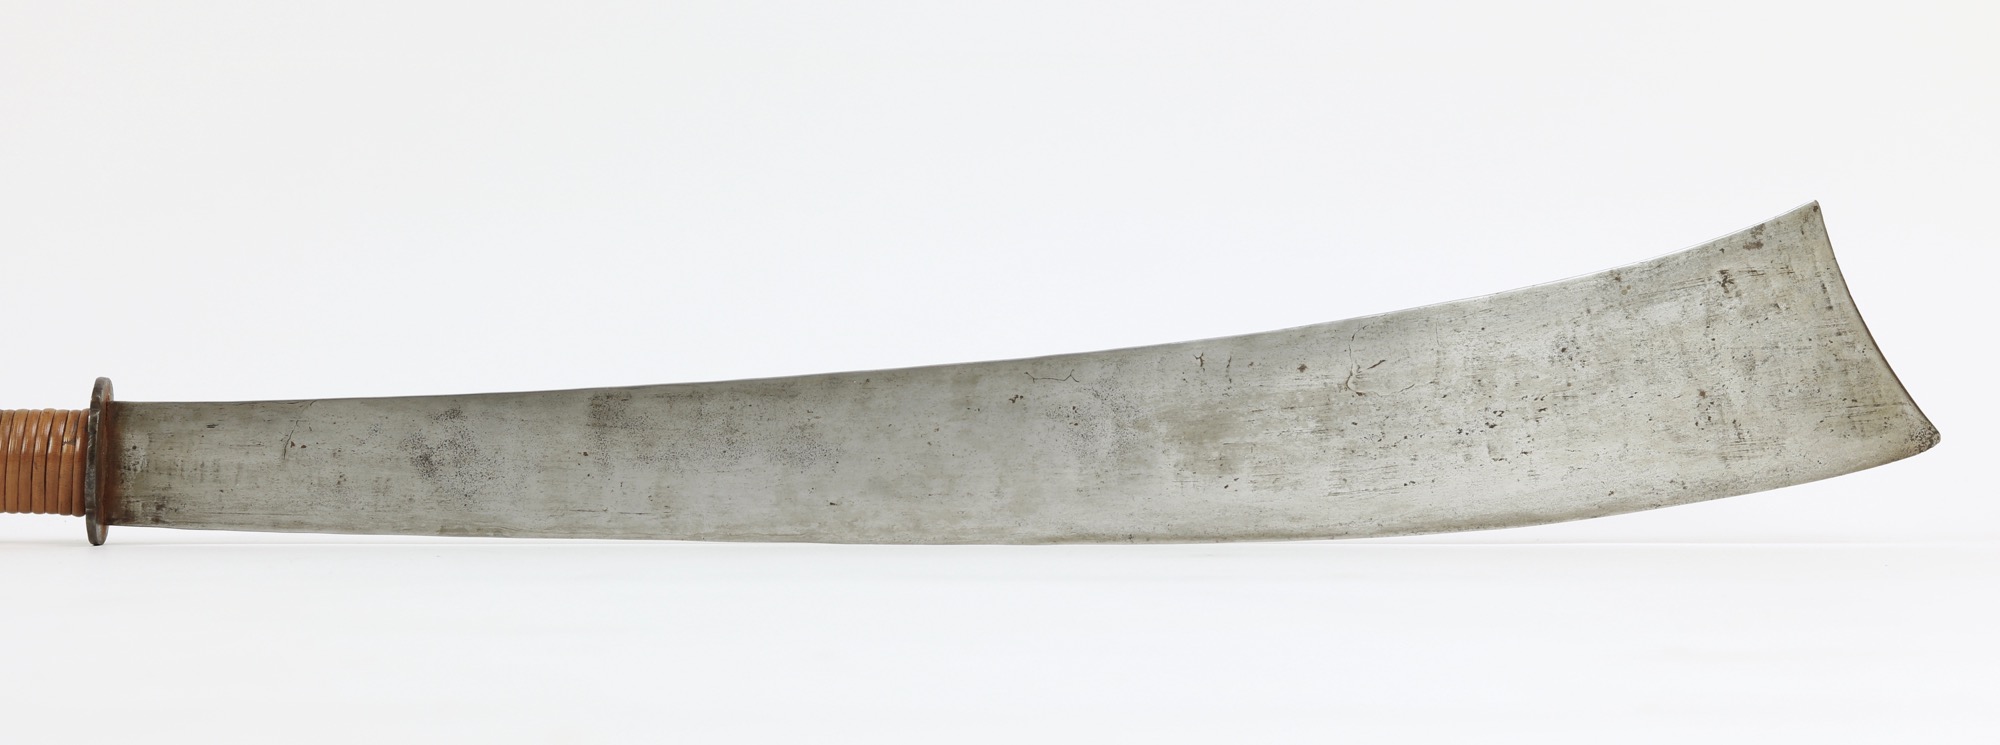 A rare Vietnamese wide-bladed fighting sword.